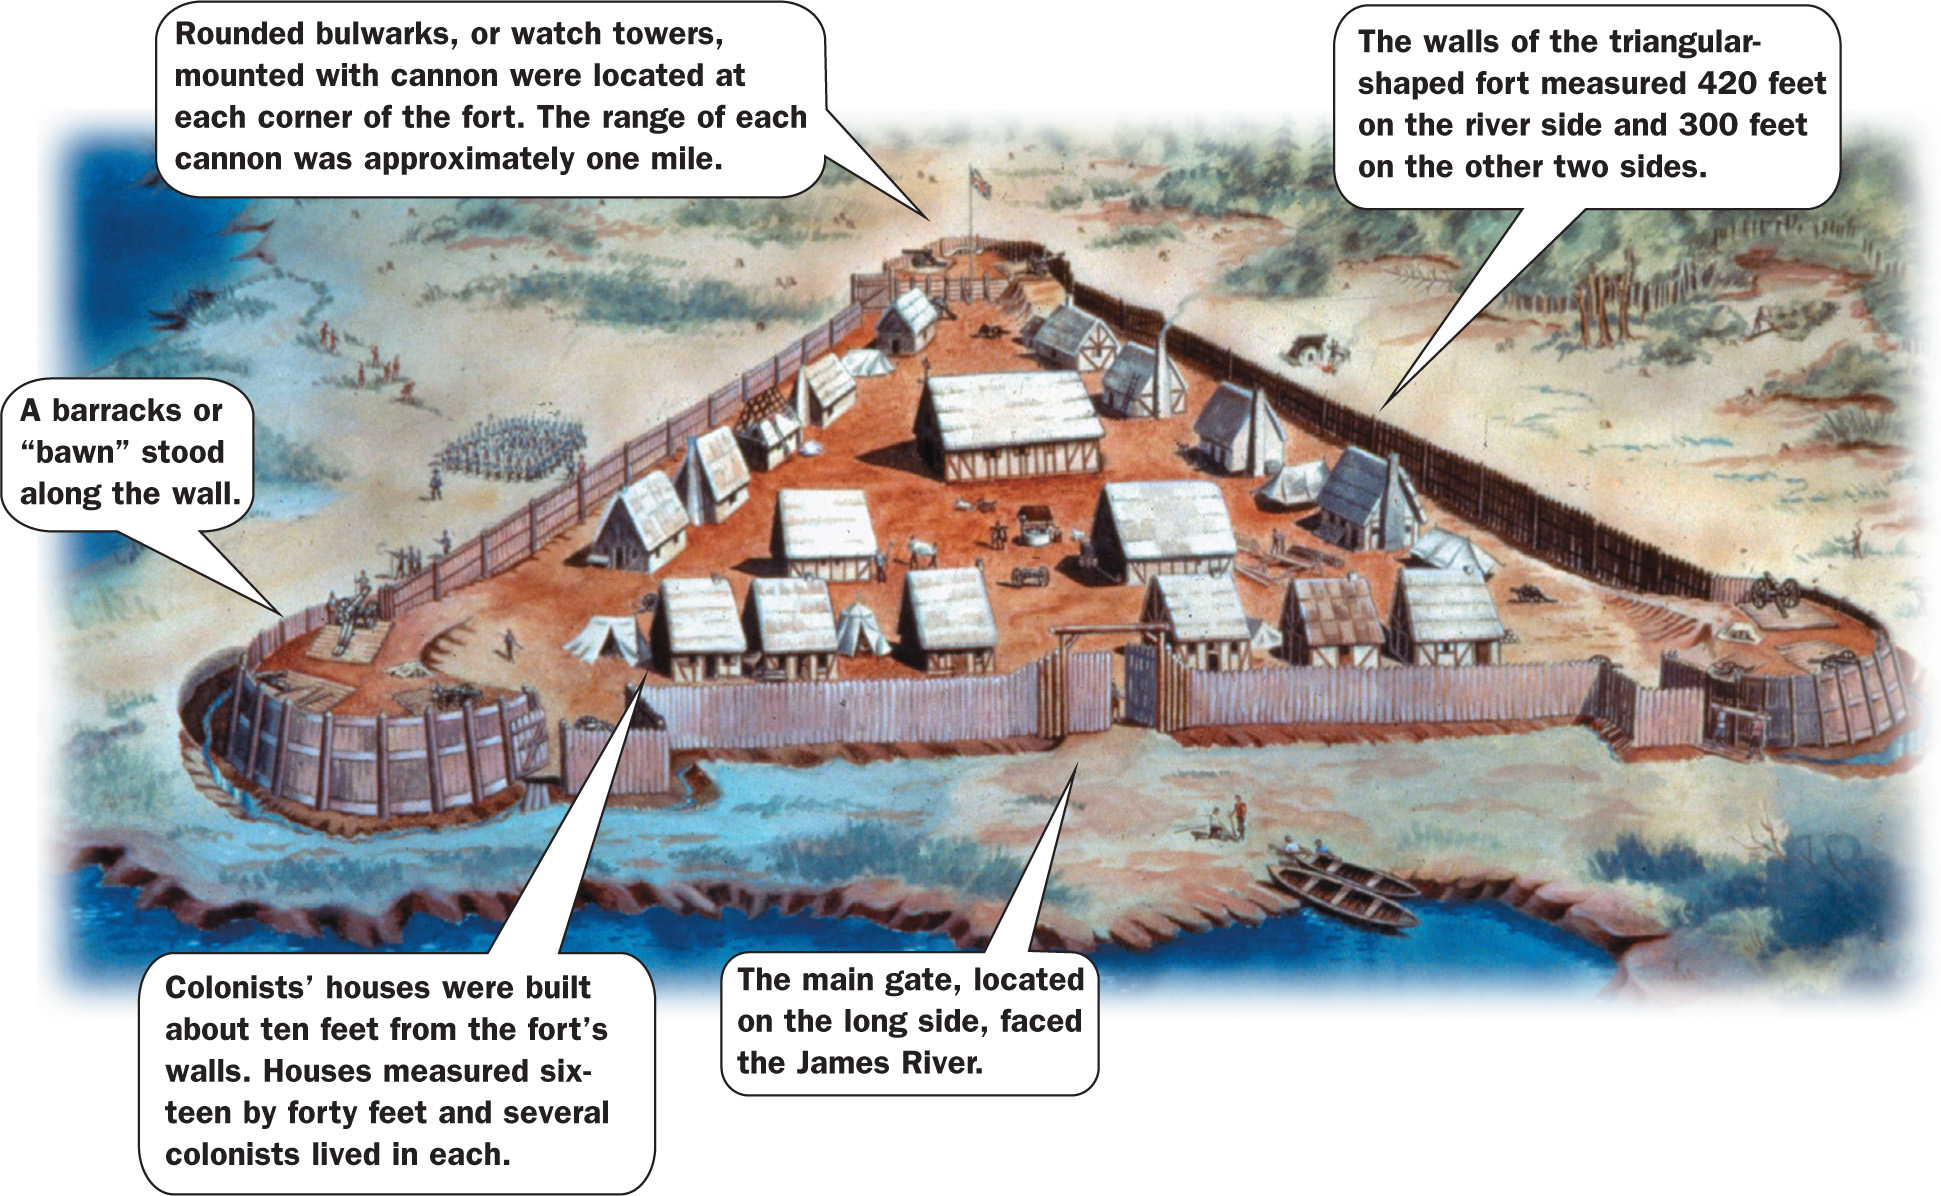 in an illustration of Fort James, three log walls surround two dozen small buildings.